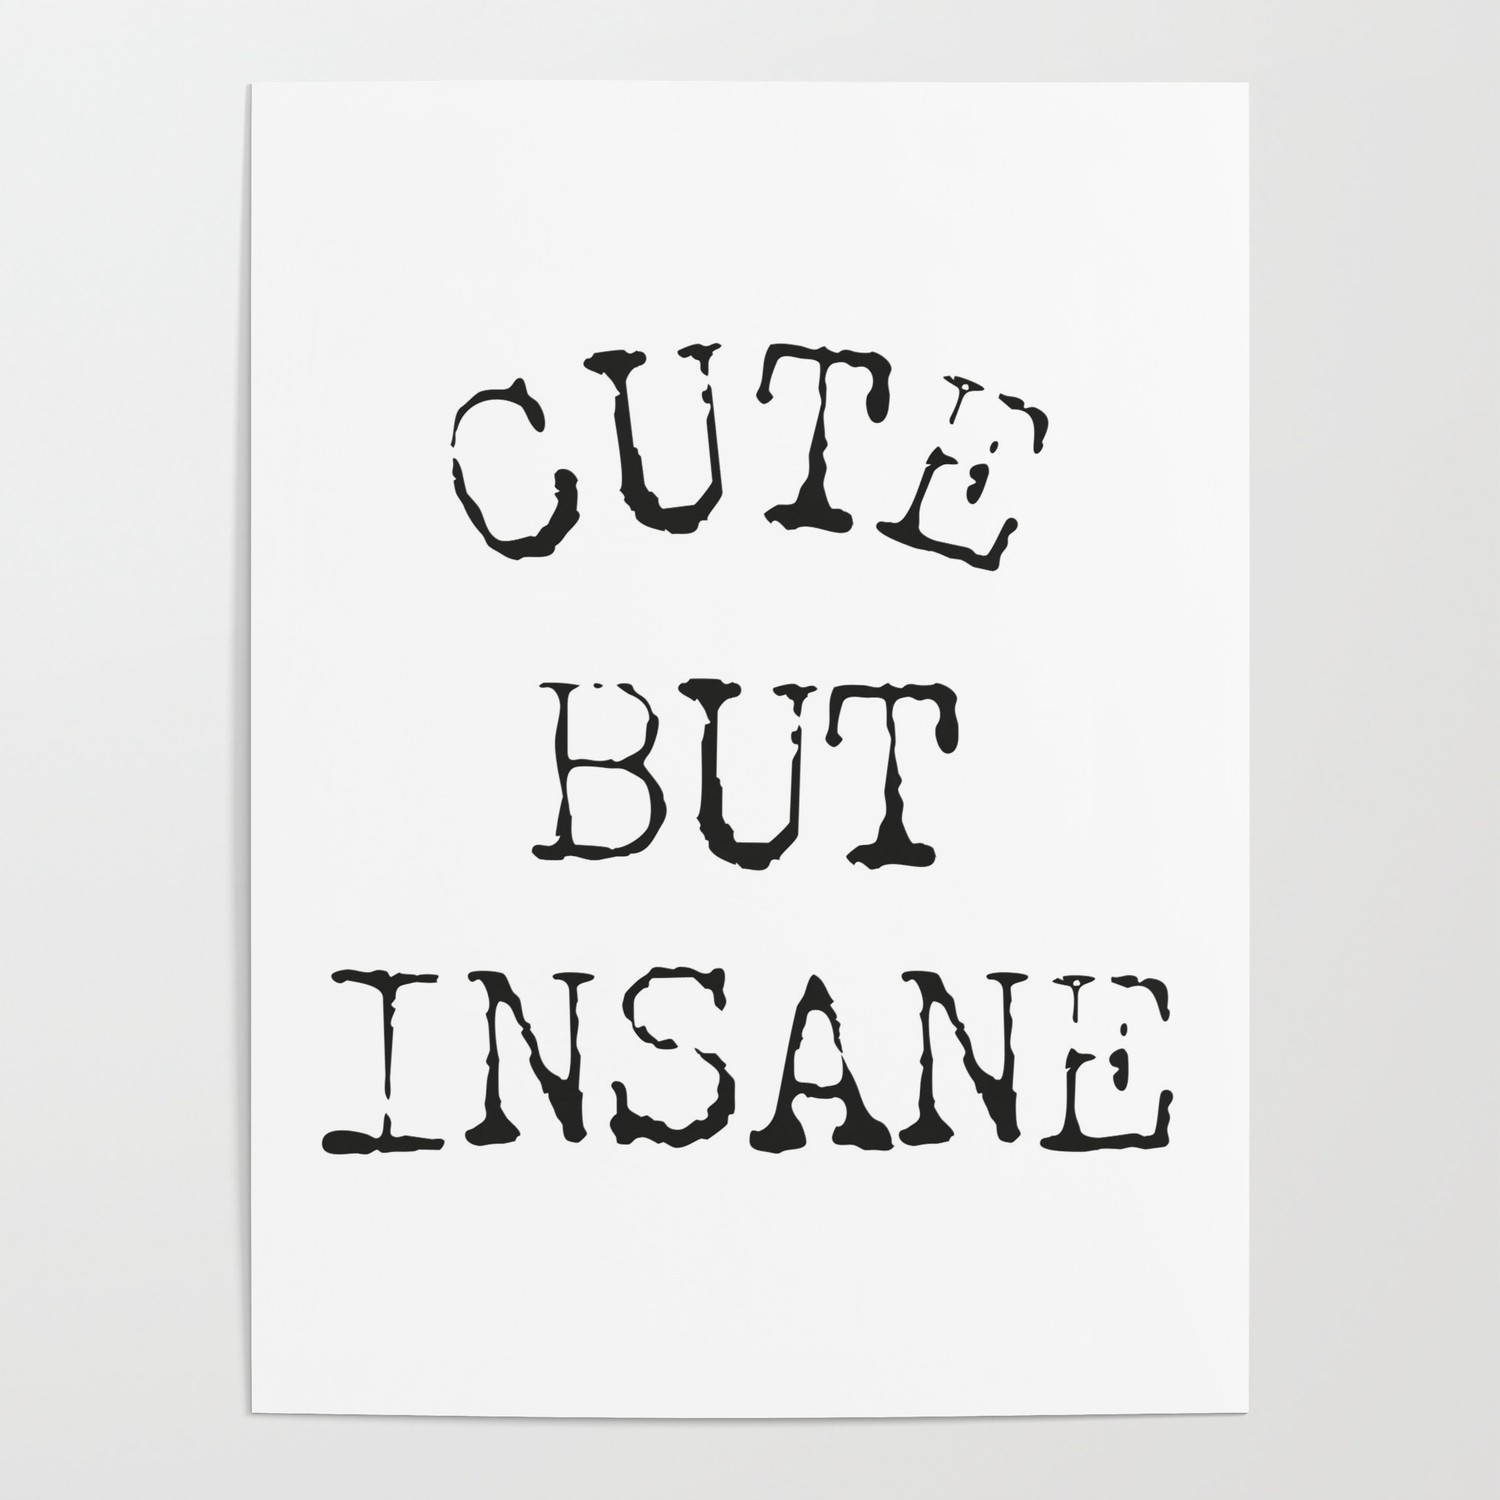 Girl power sayings. Cute but insane, funny feminist quote. Poster by  mixedandremixed | Society6